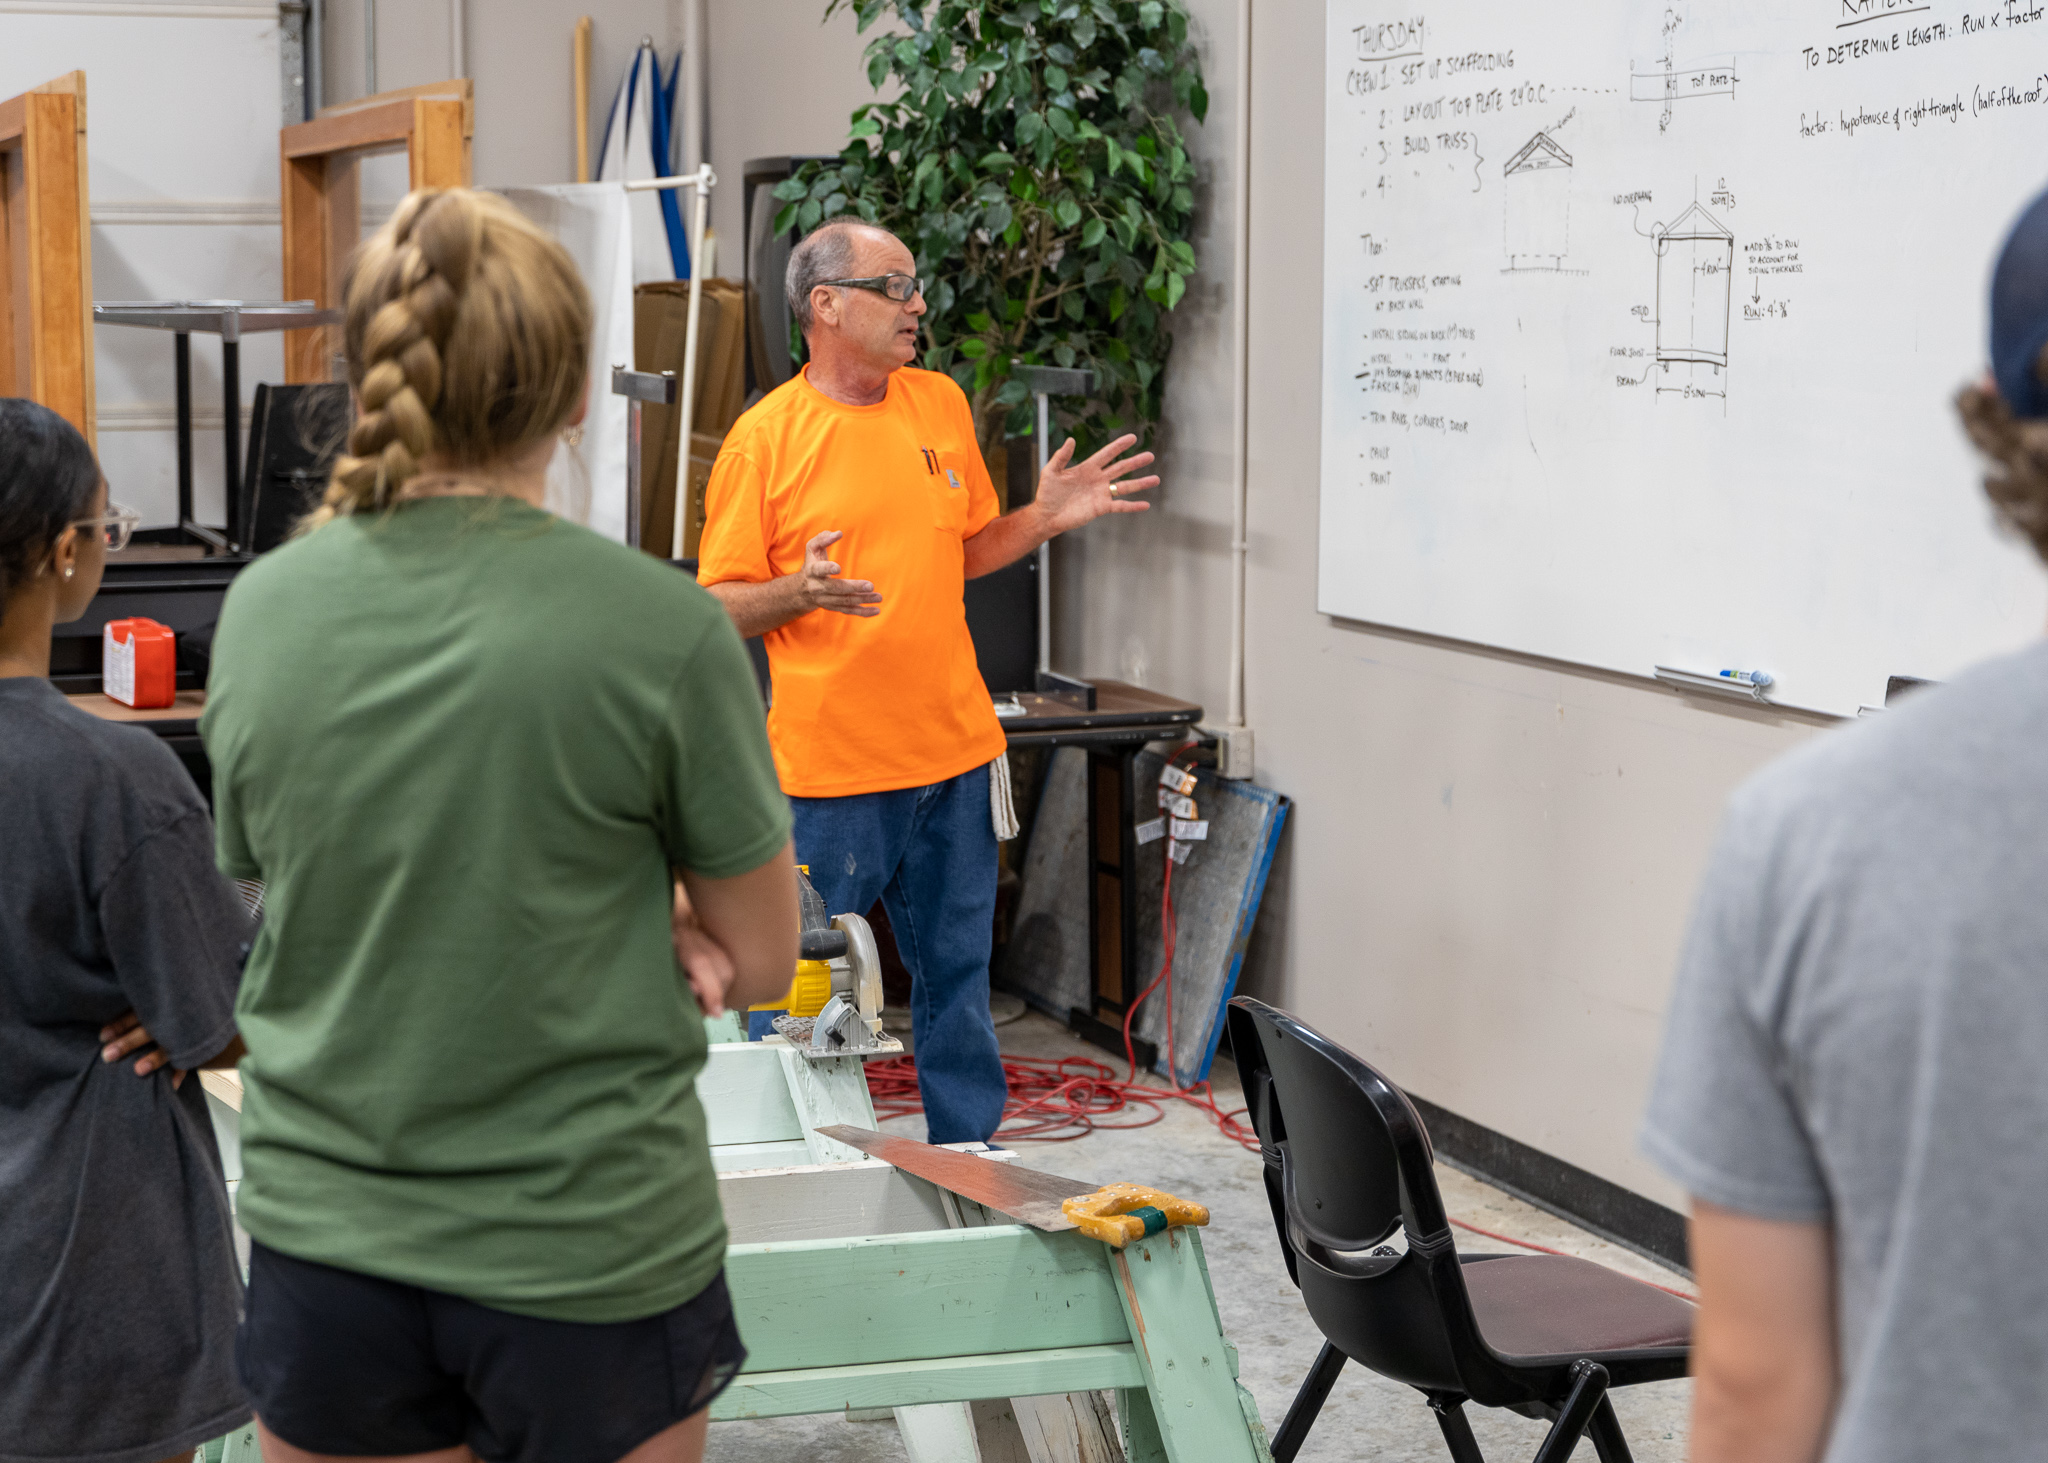 Students are show learning engineering, math, and more as they build a Tiny Home during summer 2022 Construction Management Summer Academy.